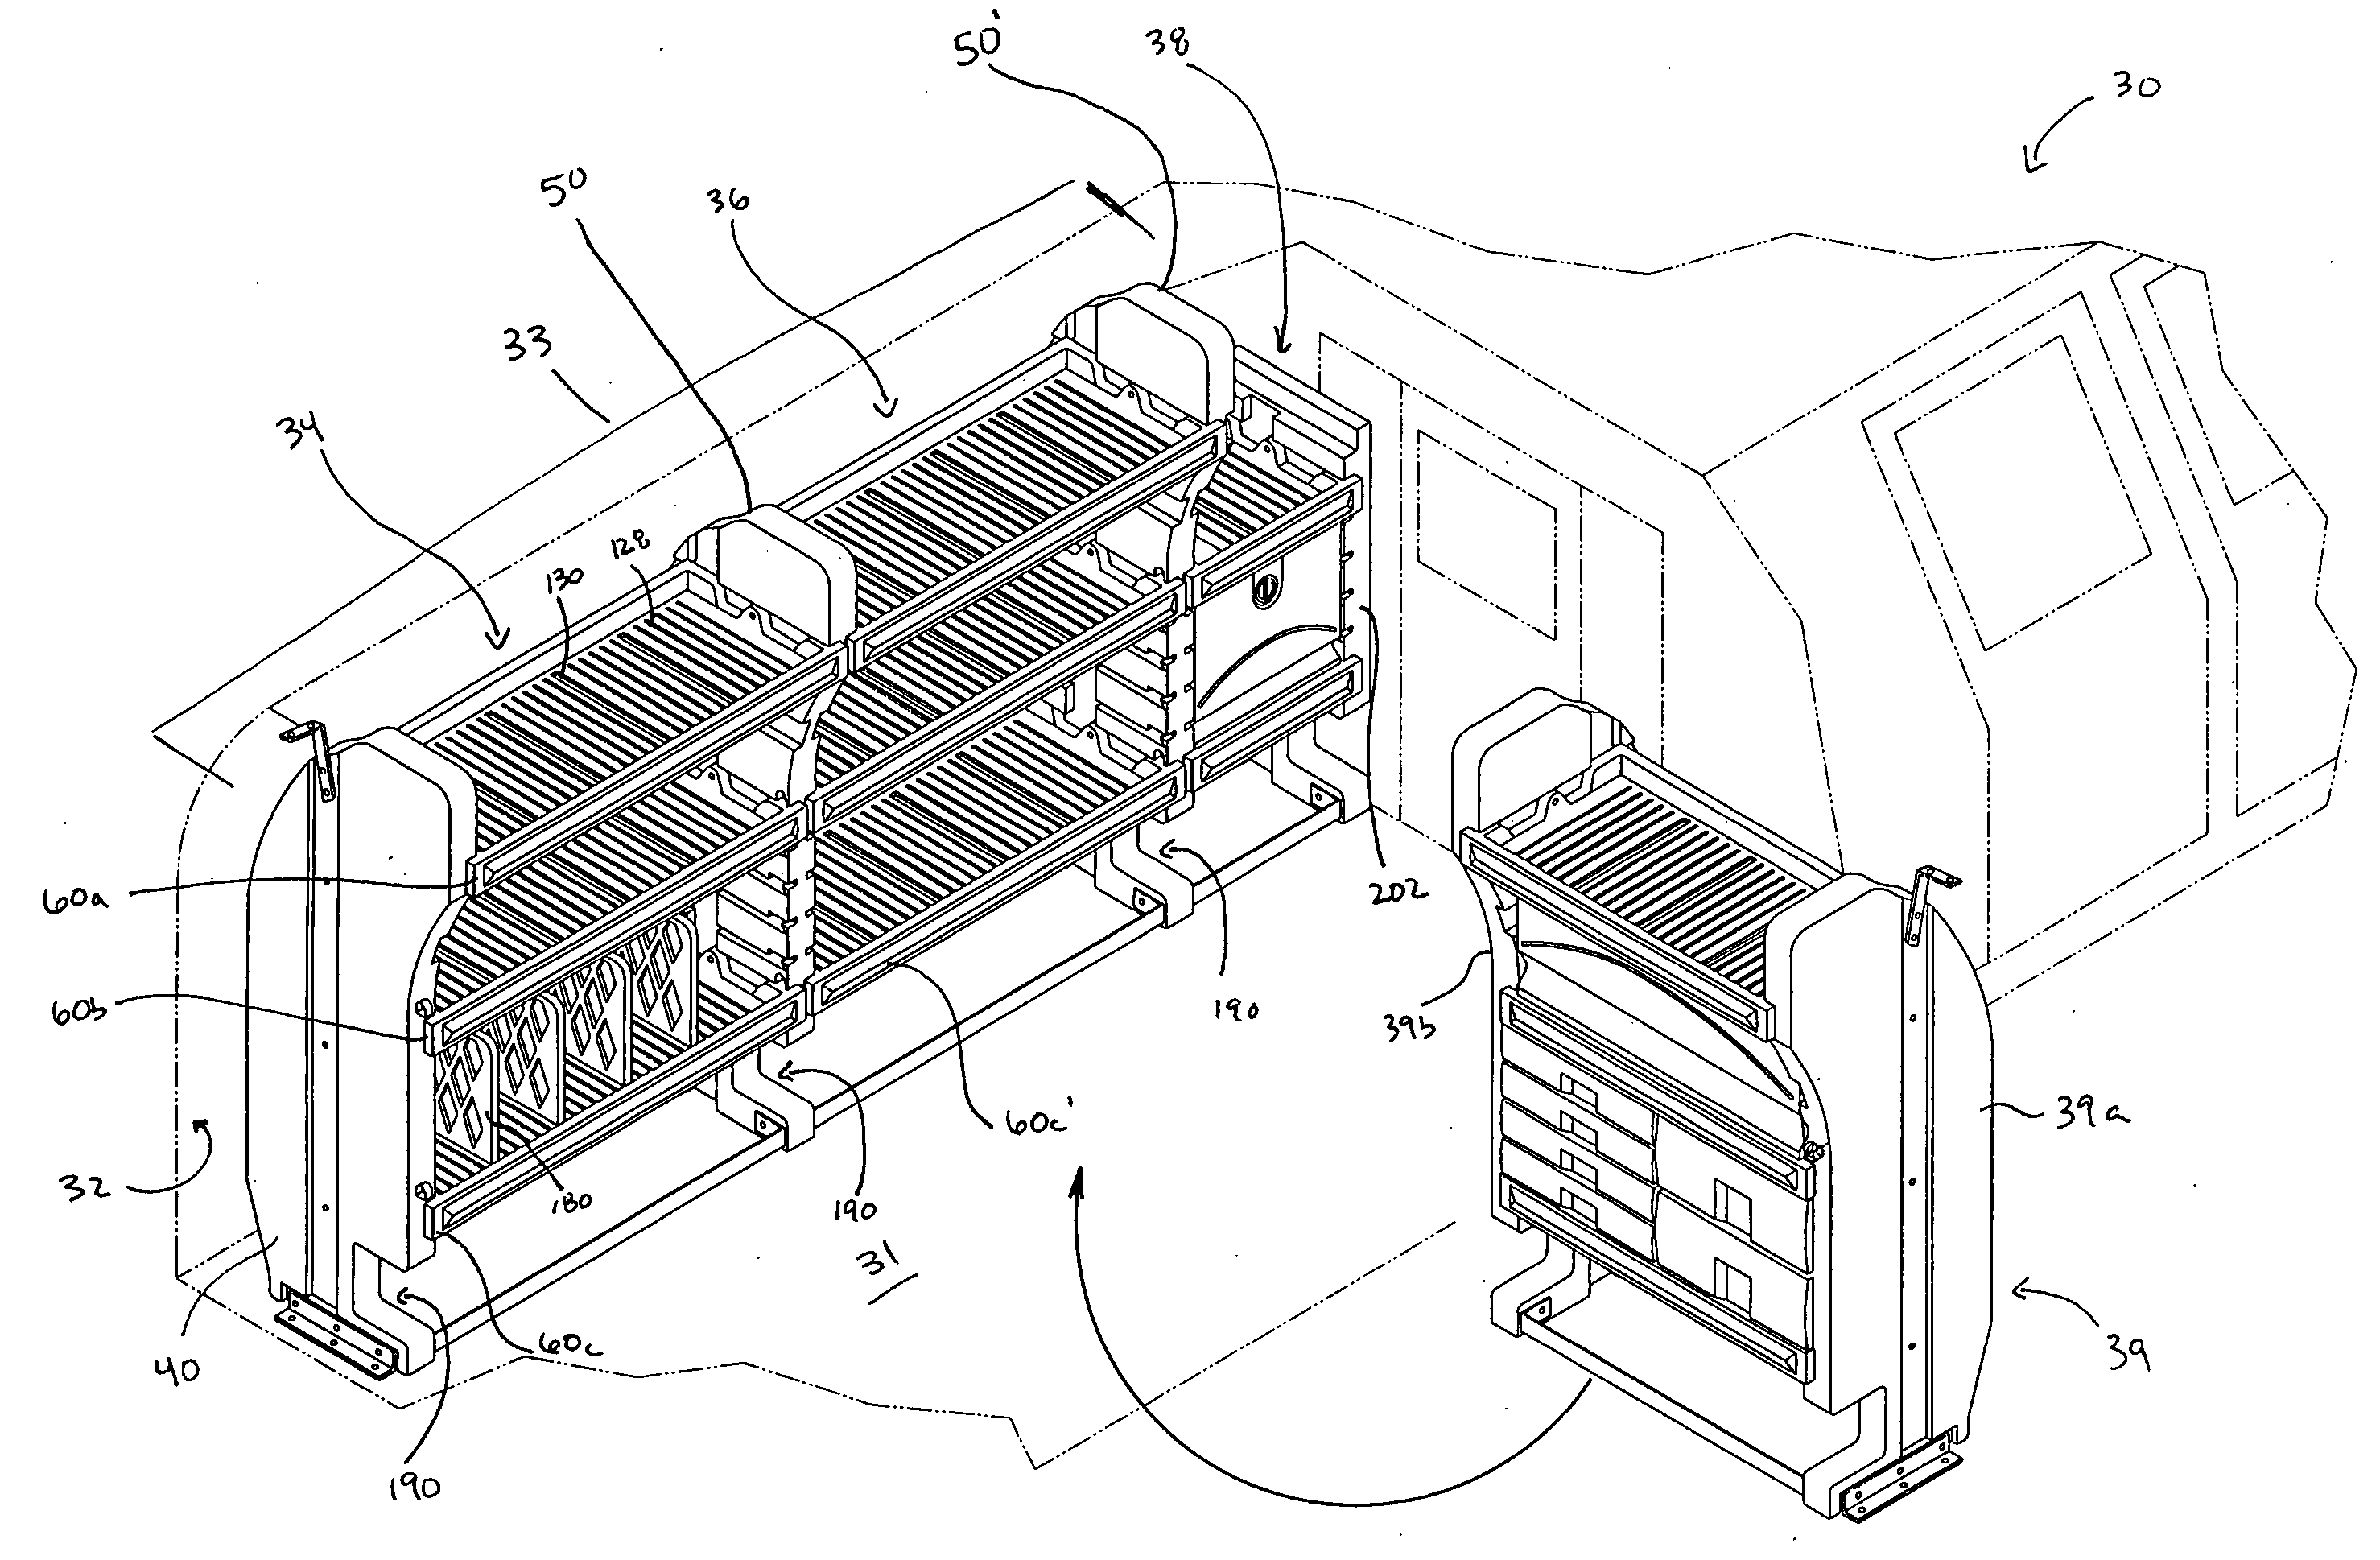 Adjustable shelving and storage system for vehicles